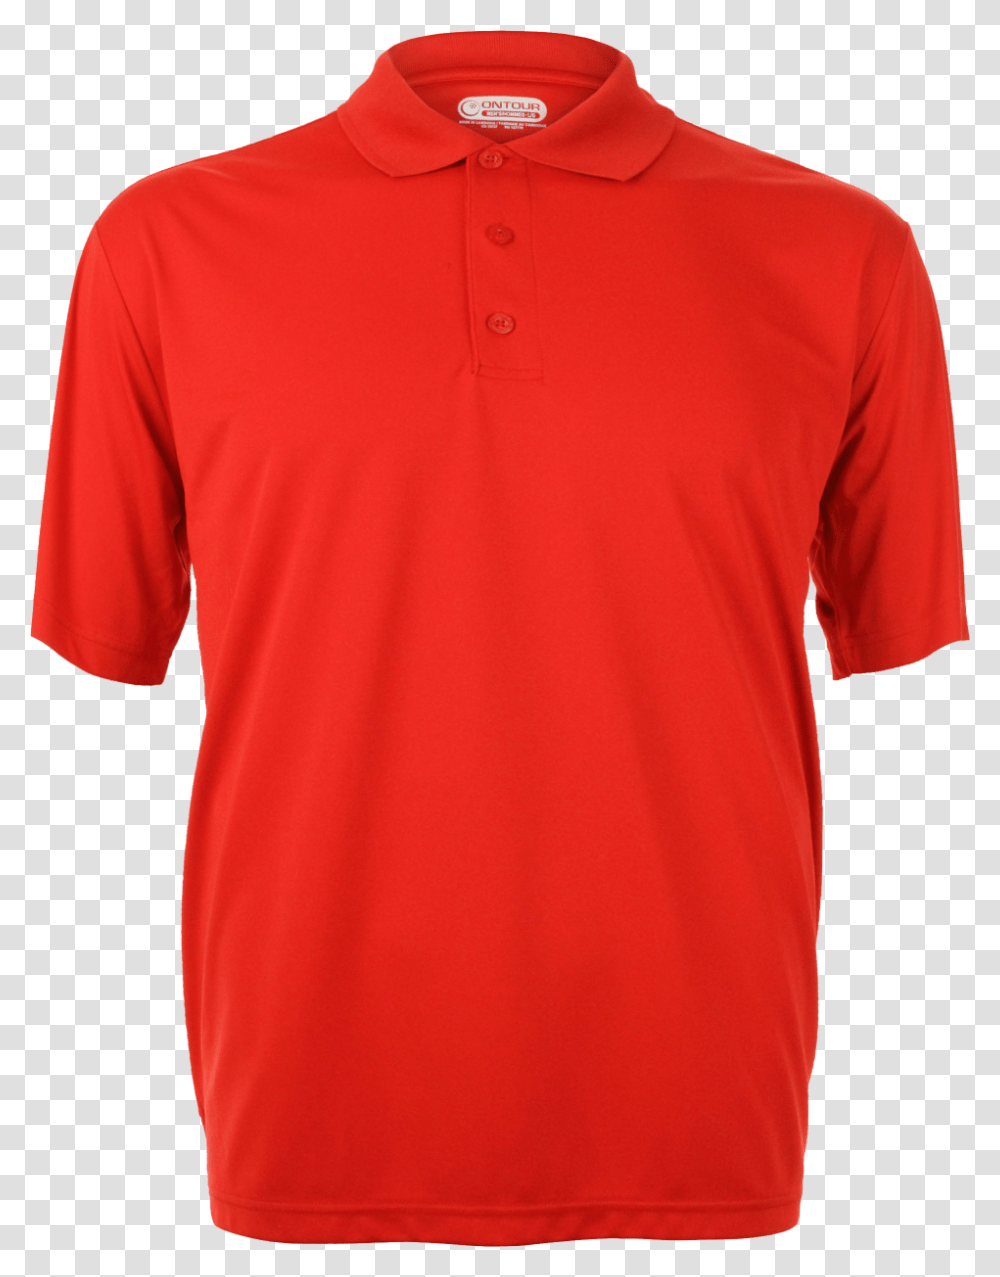 Download Shirt Free Image And Clipart Red Polo Shirt, Clothing, Sleeve, T-Shirt, Jersey Transparent Png